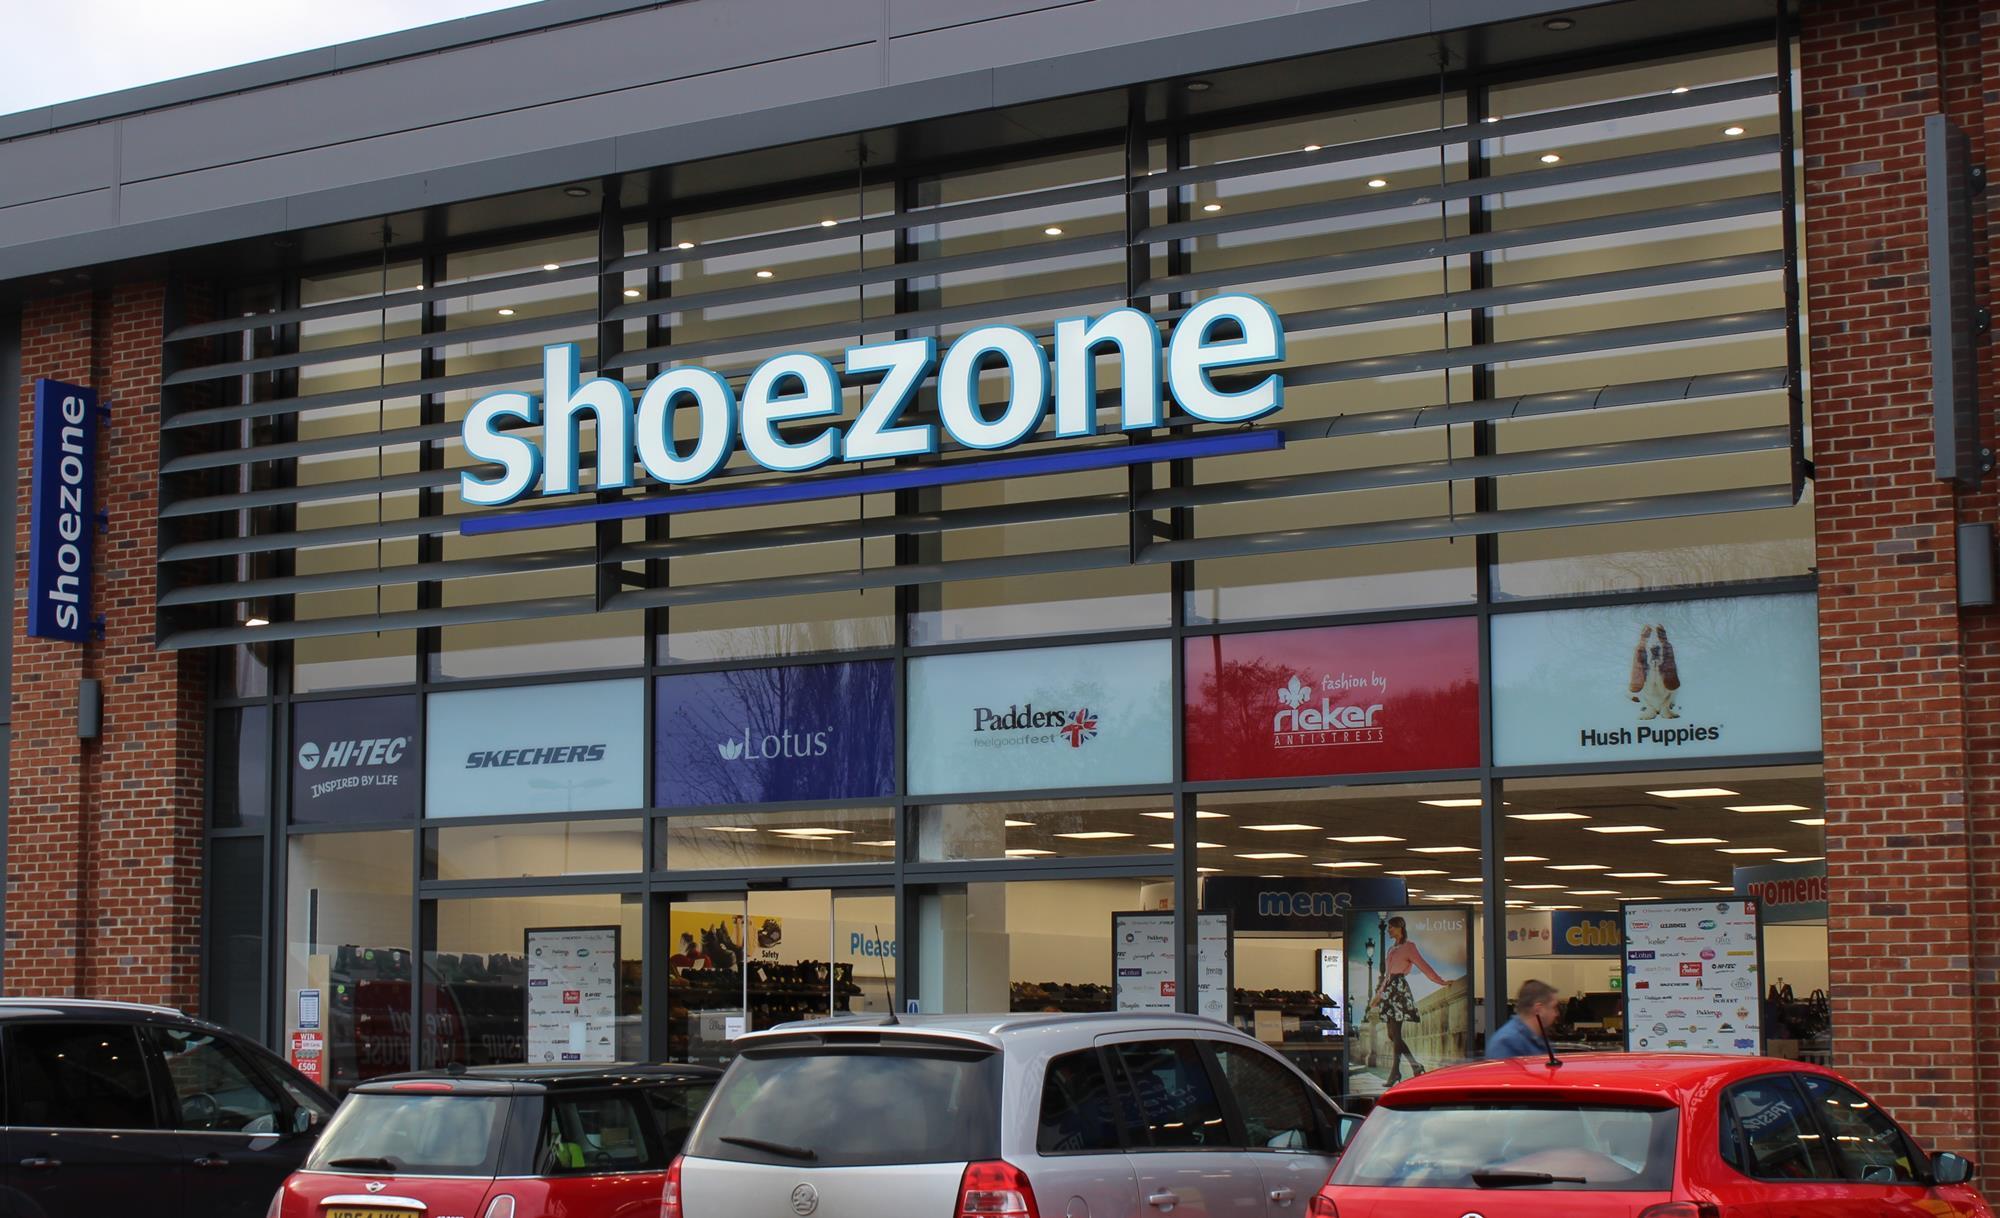 Four ways Shoe Zone aims to attract new 